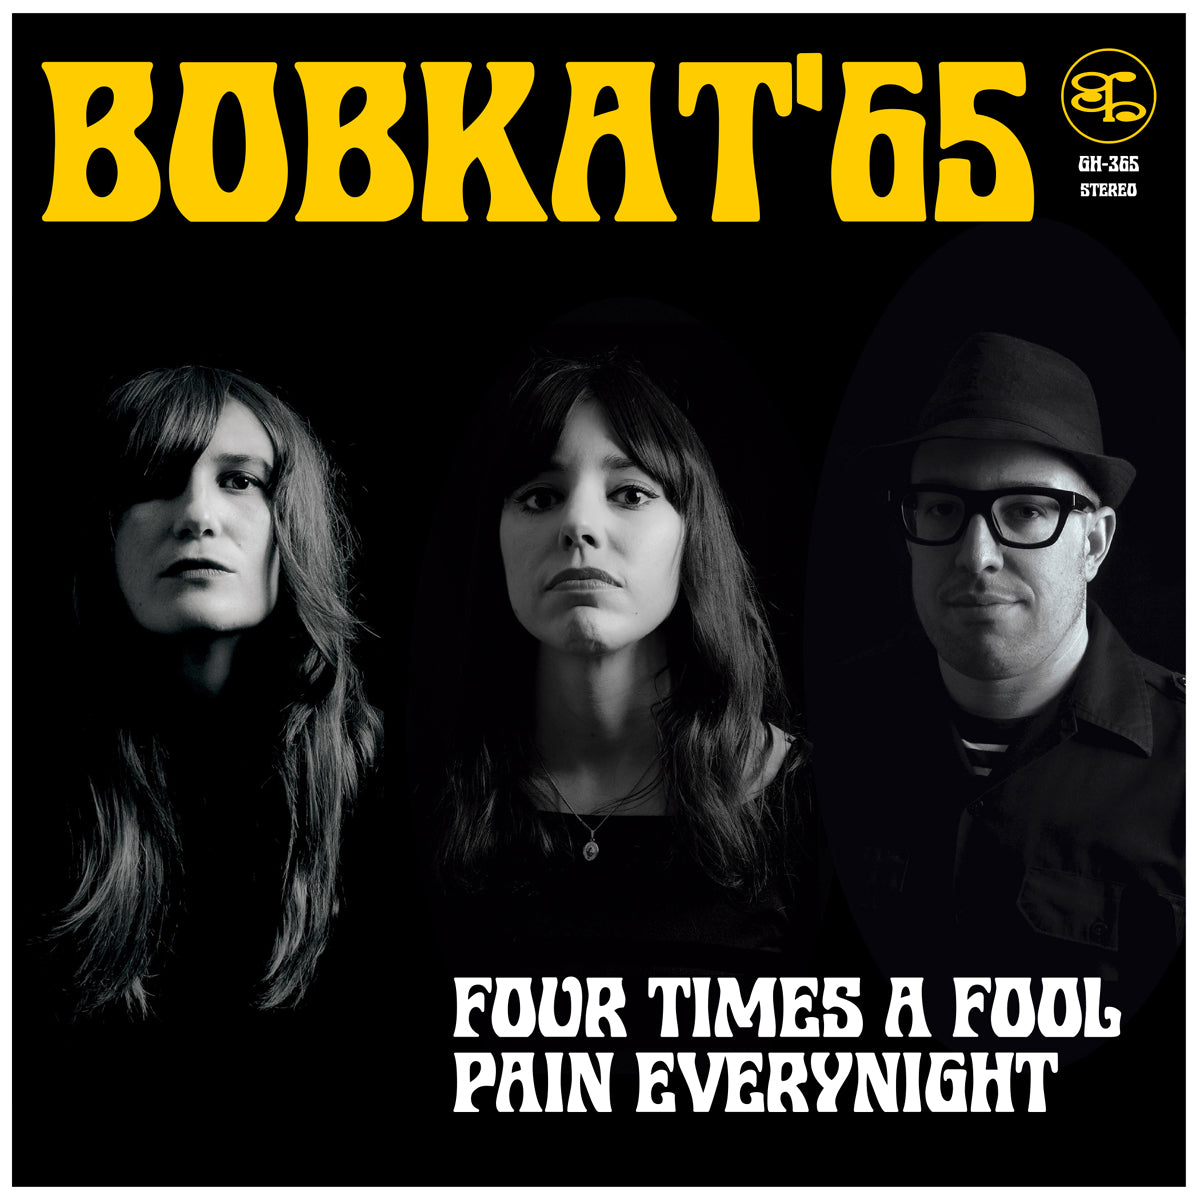 Bobkat '65 - Four Times A Fool 7”